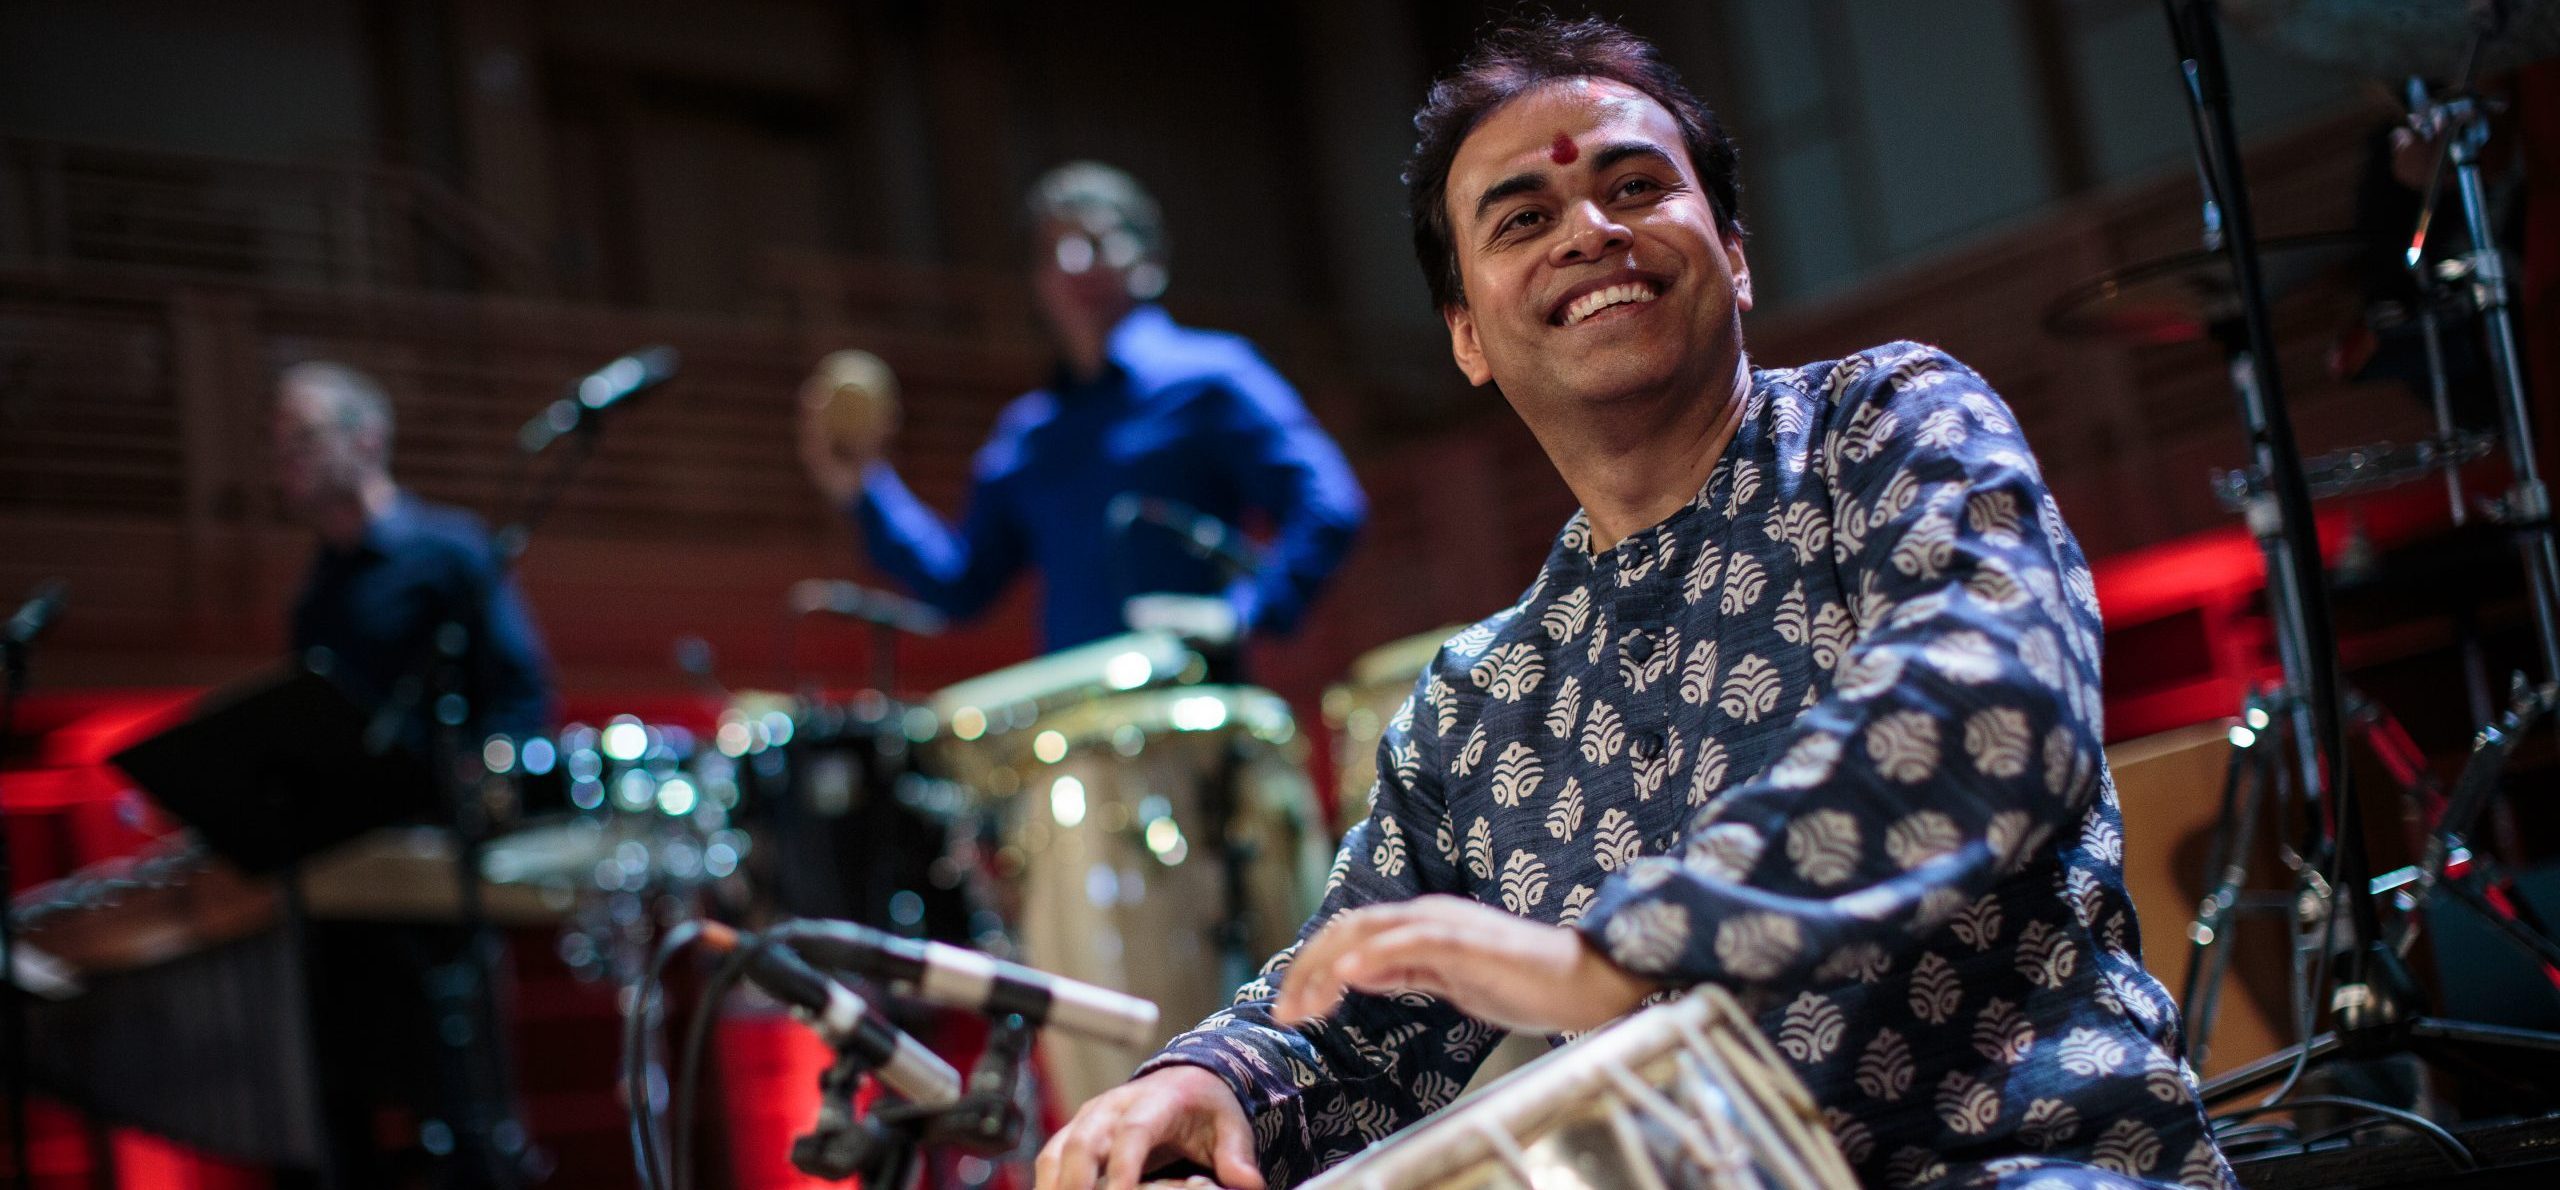 Sandeep Das, an Indian man wearing a blue and white patterned shirt, sits while playing the table, a drum